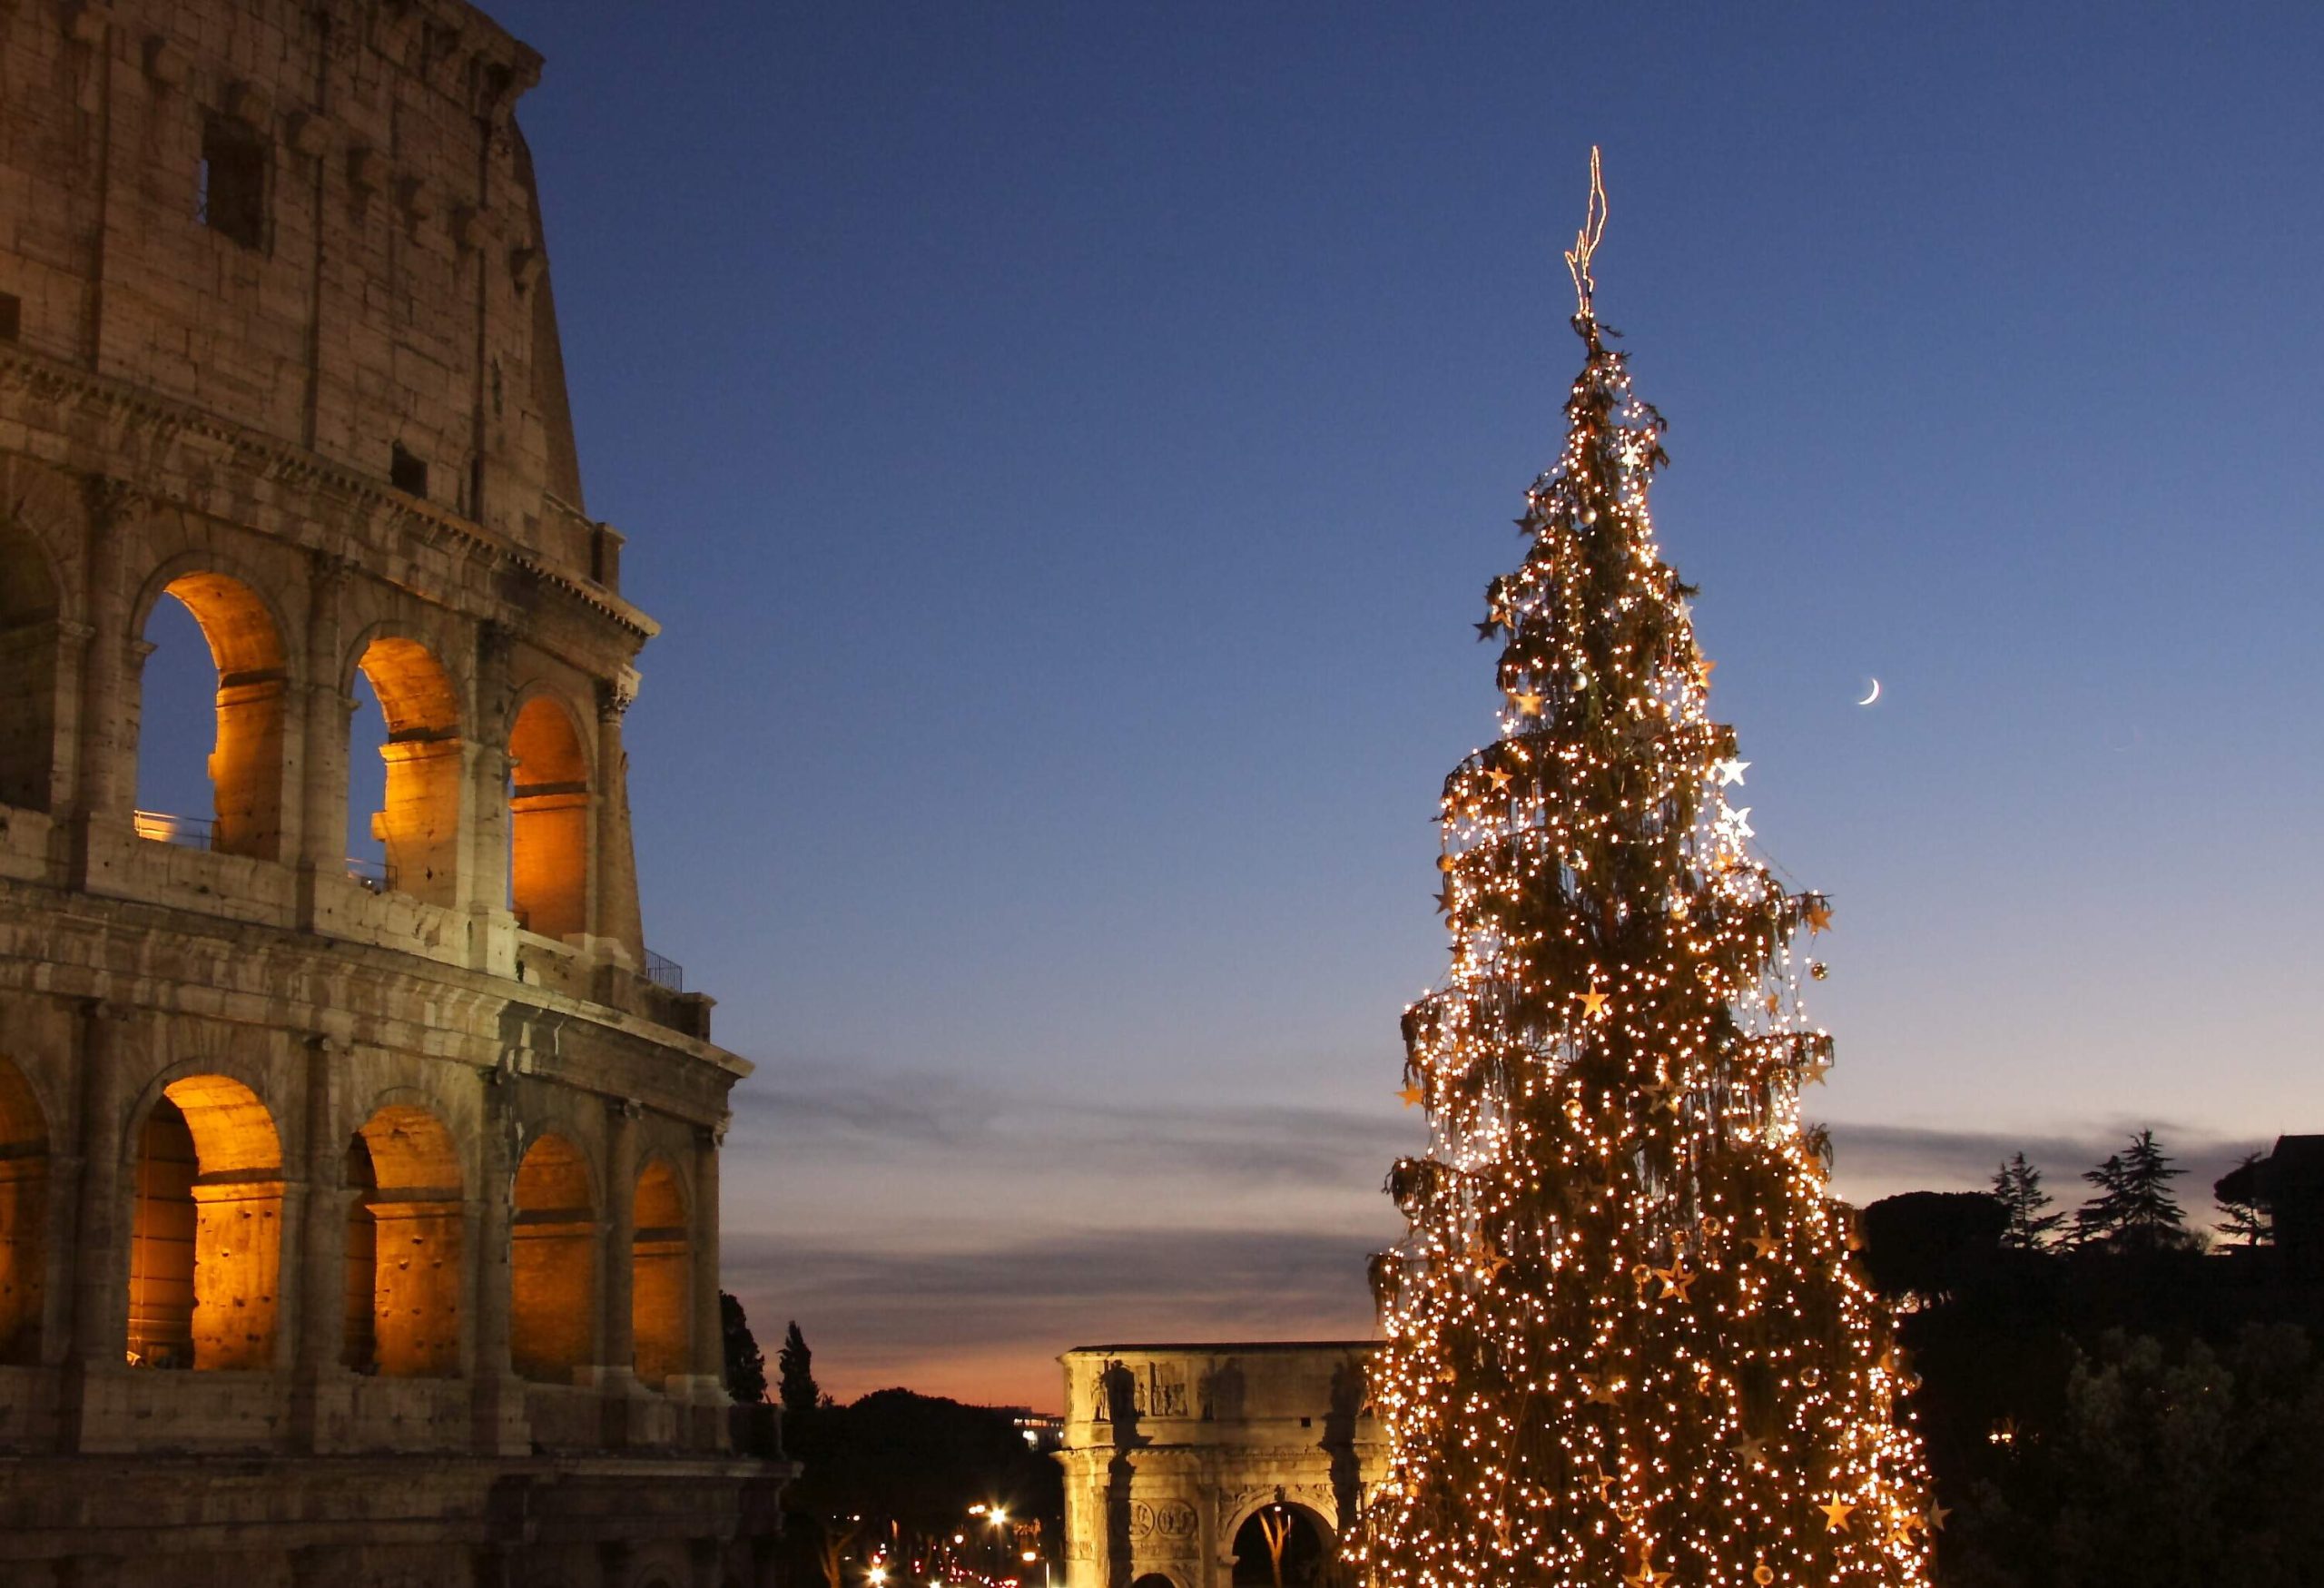 A tall Christmas tree decorated with bright lights next to the illuminated ruins of the Coliseum in Rome, Italy.